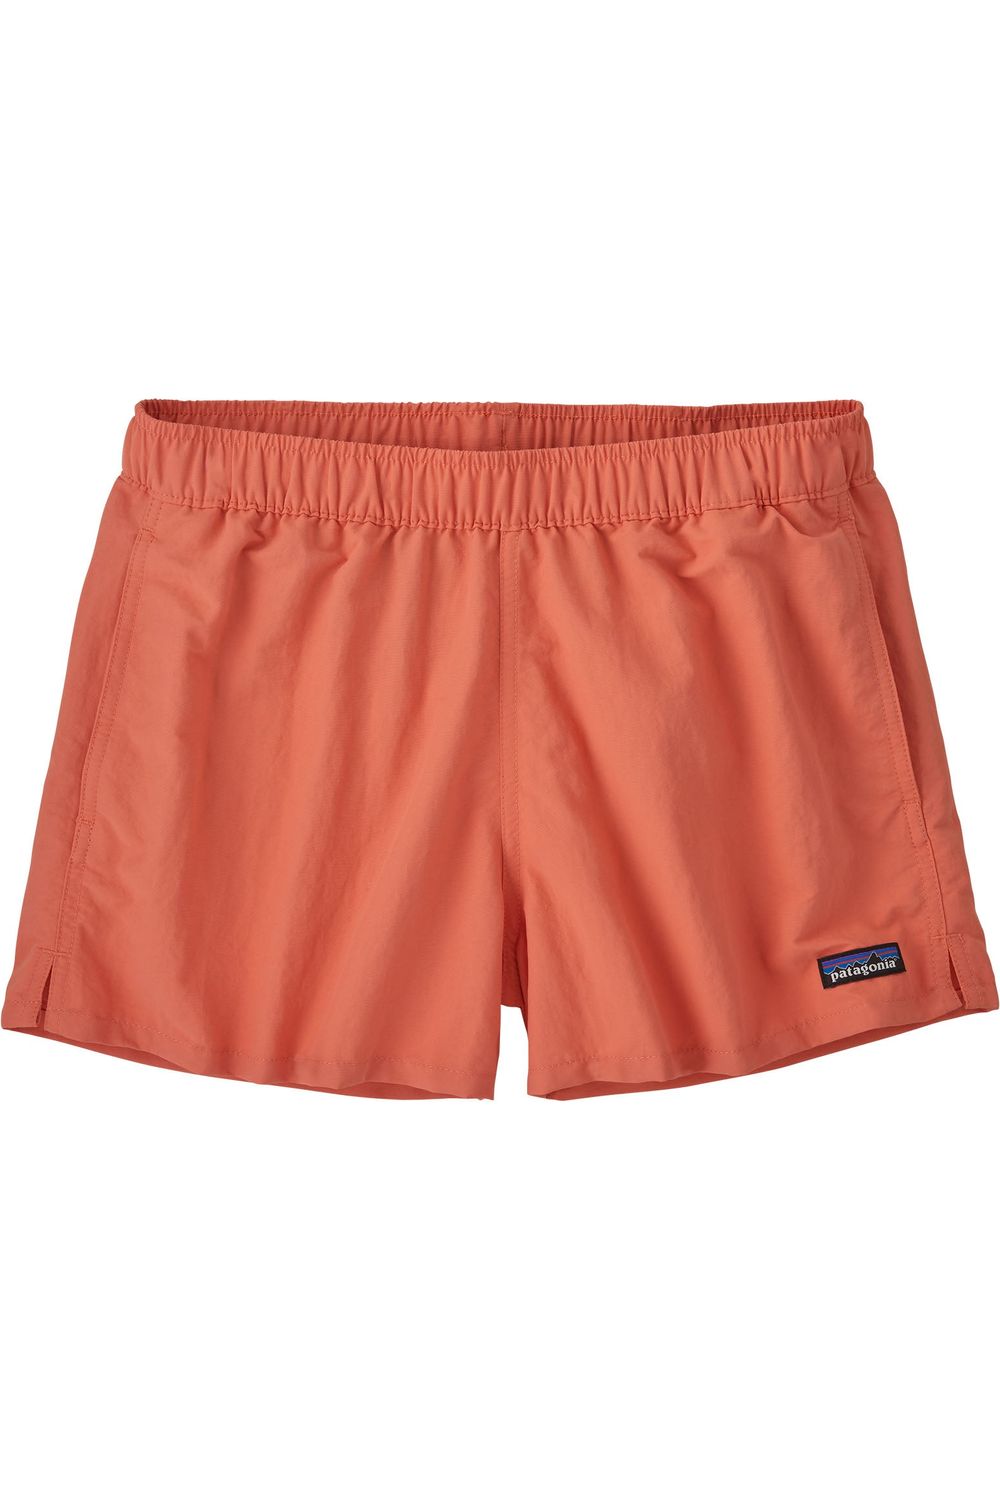 Patagonia Womens's Barely Baggies Shorts 2 1/2in Coho Coral